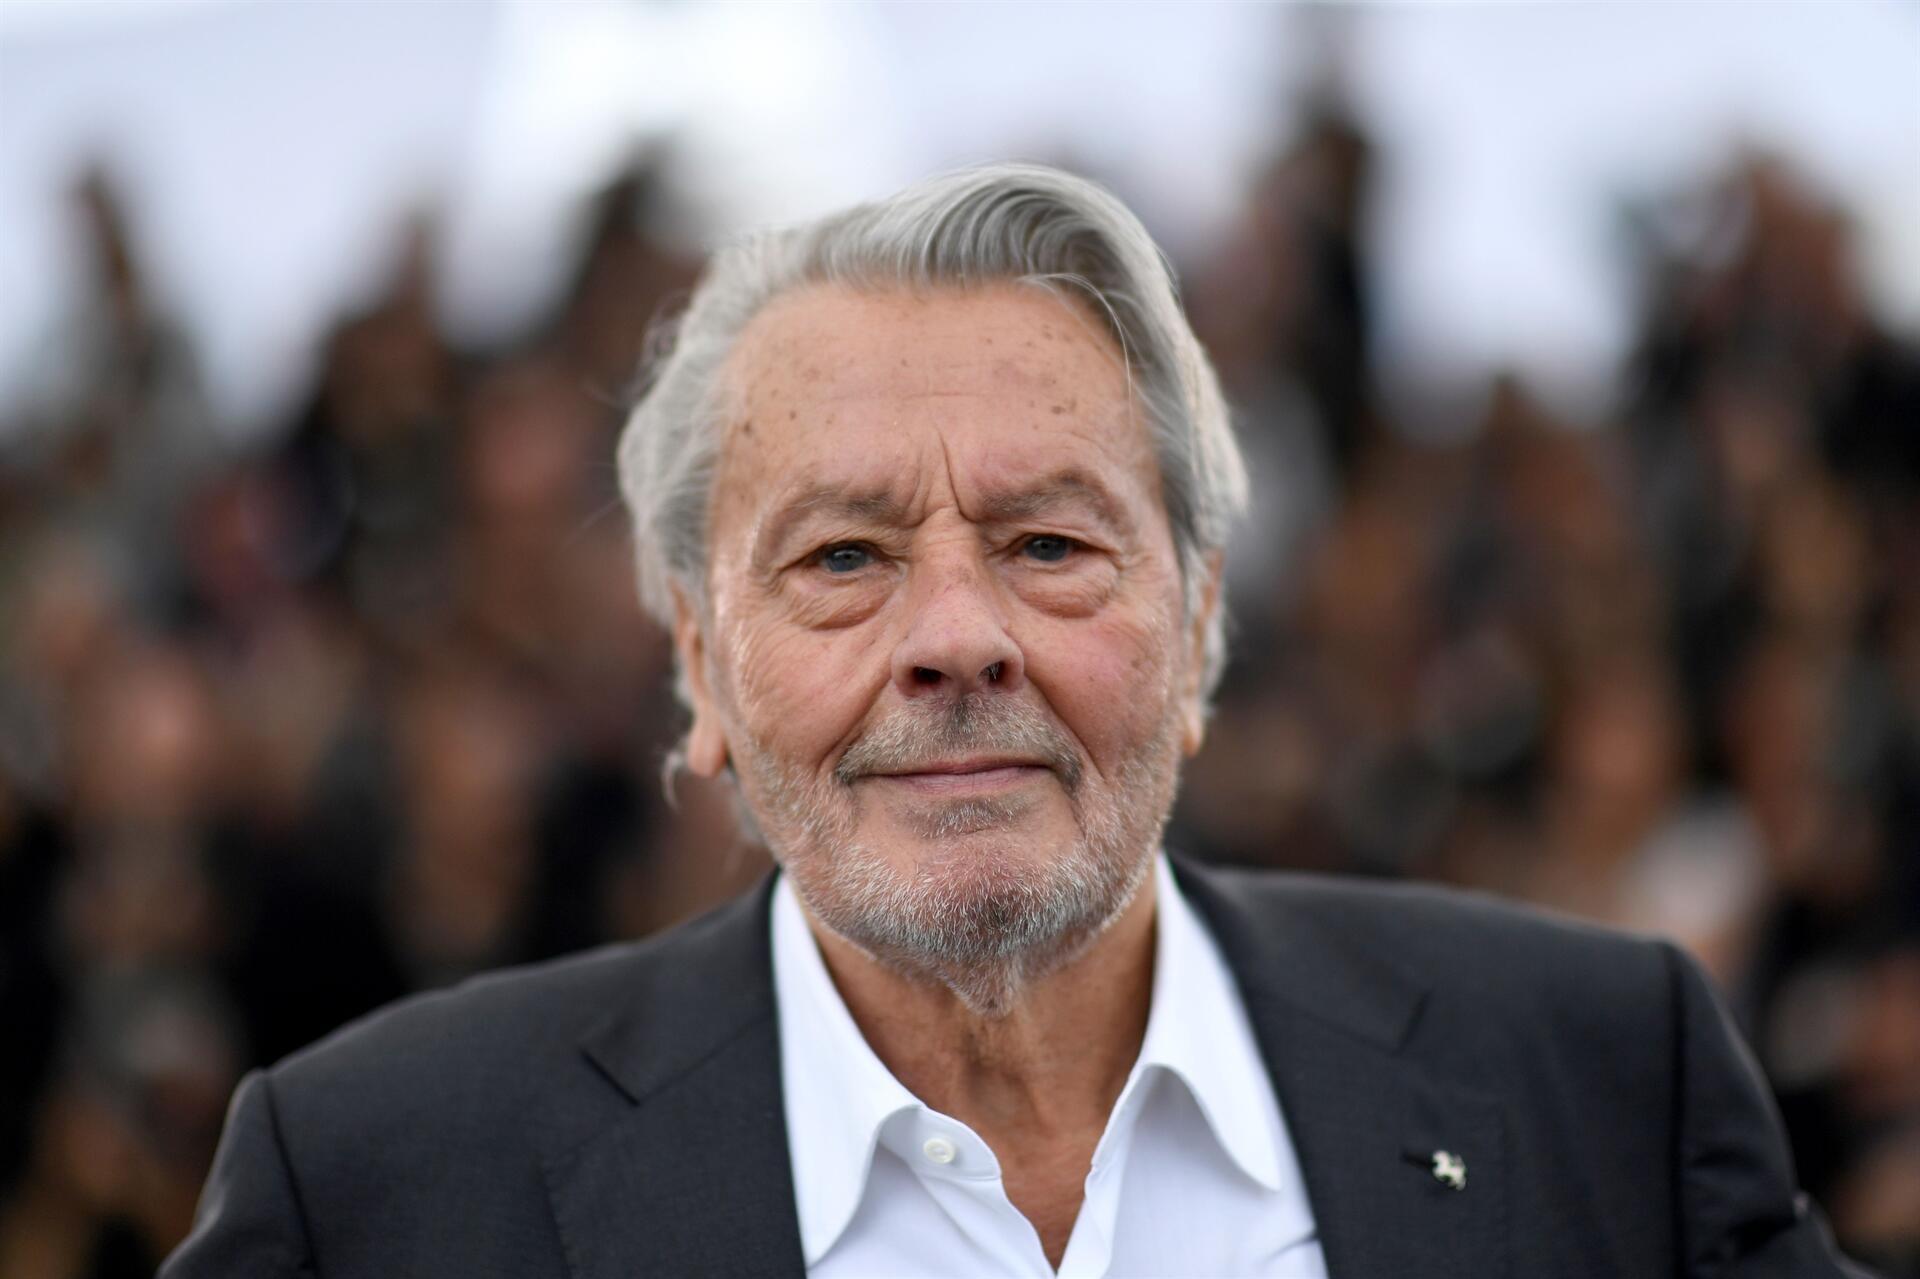 French actor Alain Delon recovers in Switzerland after stoke: family